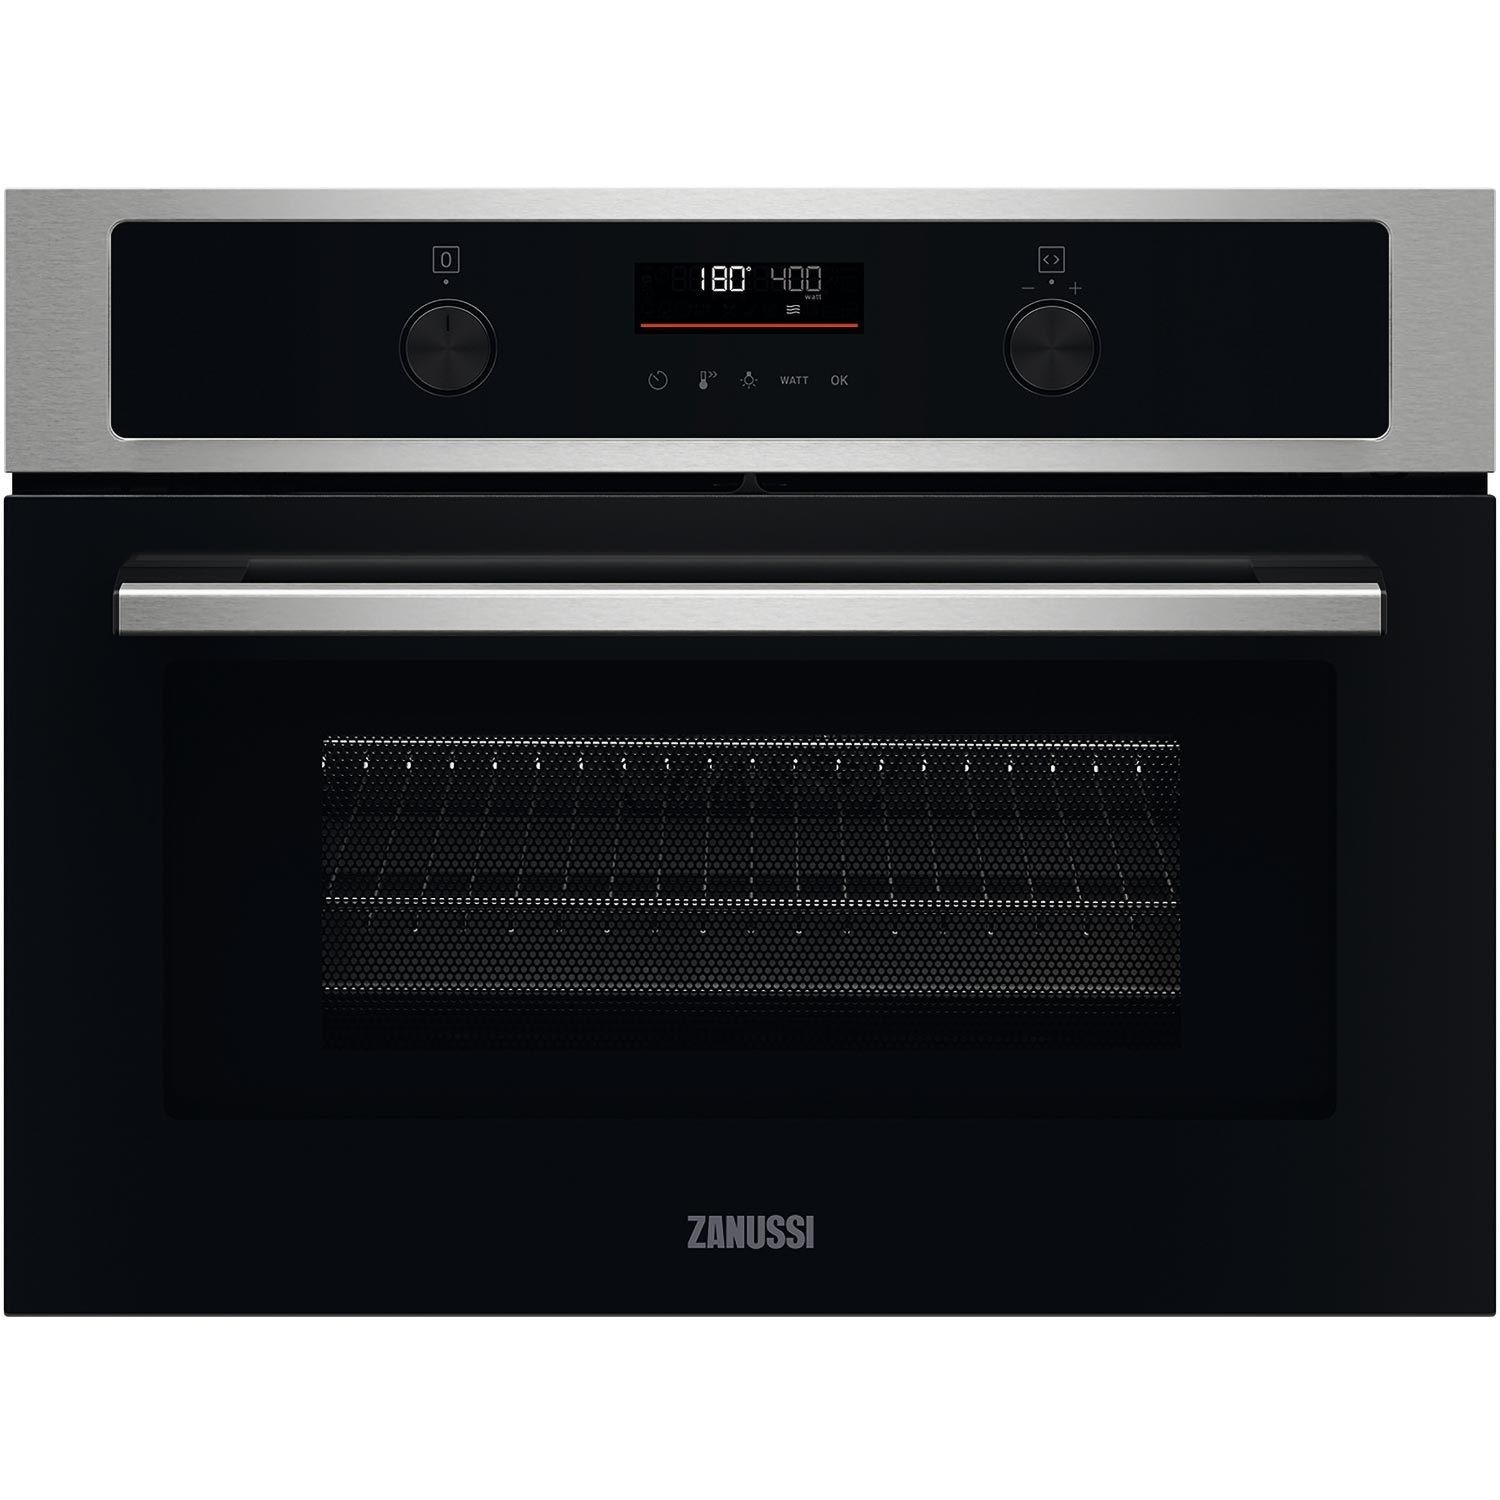 Photos - Other for Computer Zanussi Series 60 Built In Combination Microwave - Stainless Steel ZVENM7X 